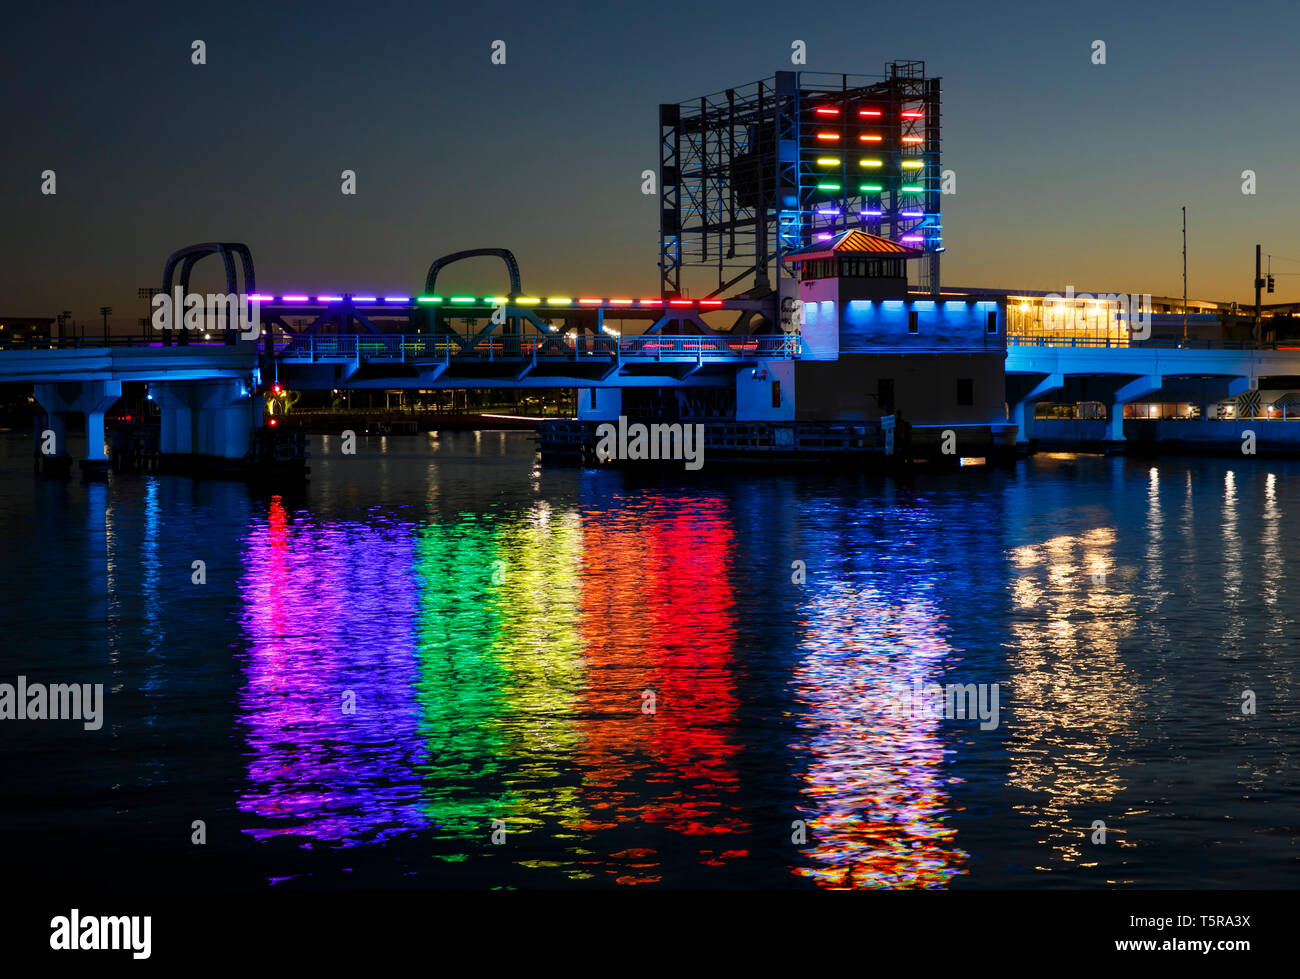 Tampa's Fortune Taylor Bridge is illuminated as one of the city's public art works on the bridges spanning the Hillsborough River along Tampa's Riverw Stock Photo